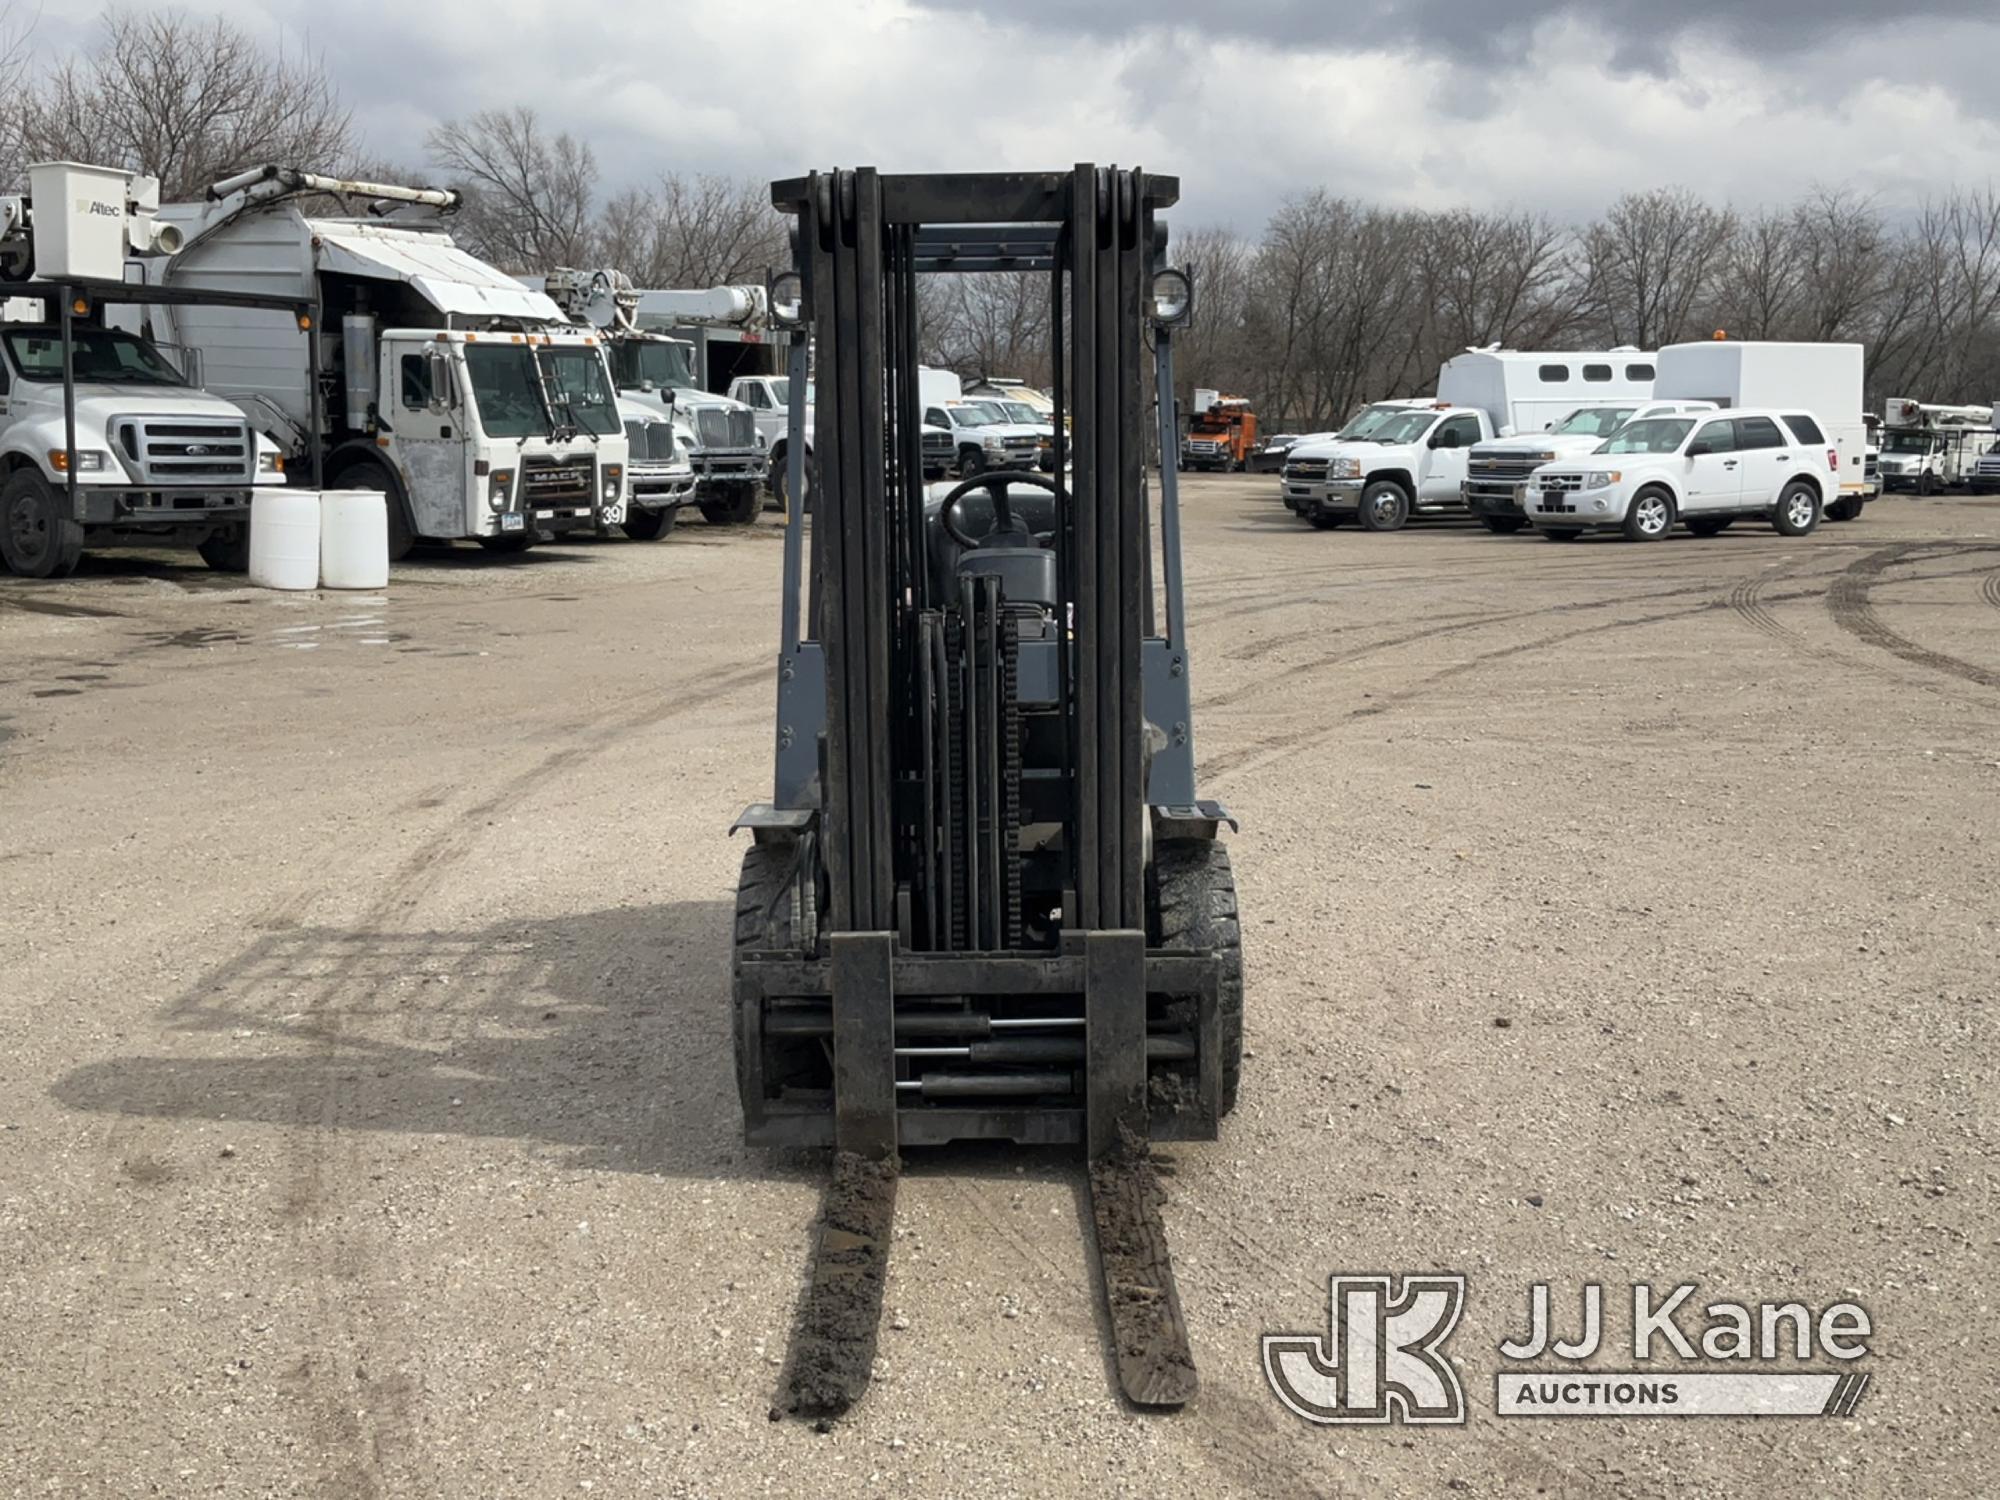 (Des Moines, IA) 1995 Toyota 426FGCU25 Solid Tired Forklift, Tank NOT Included Runs, Moves, Operates